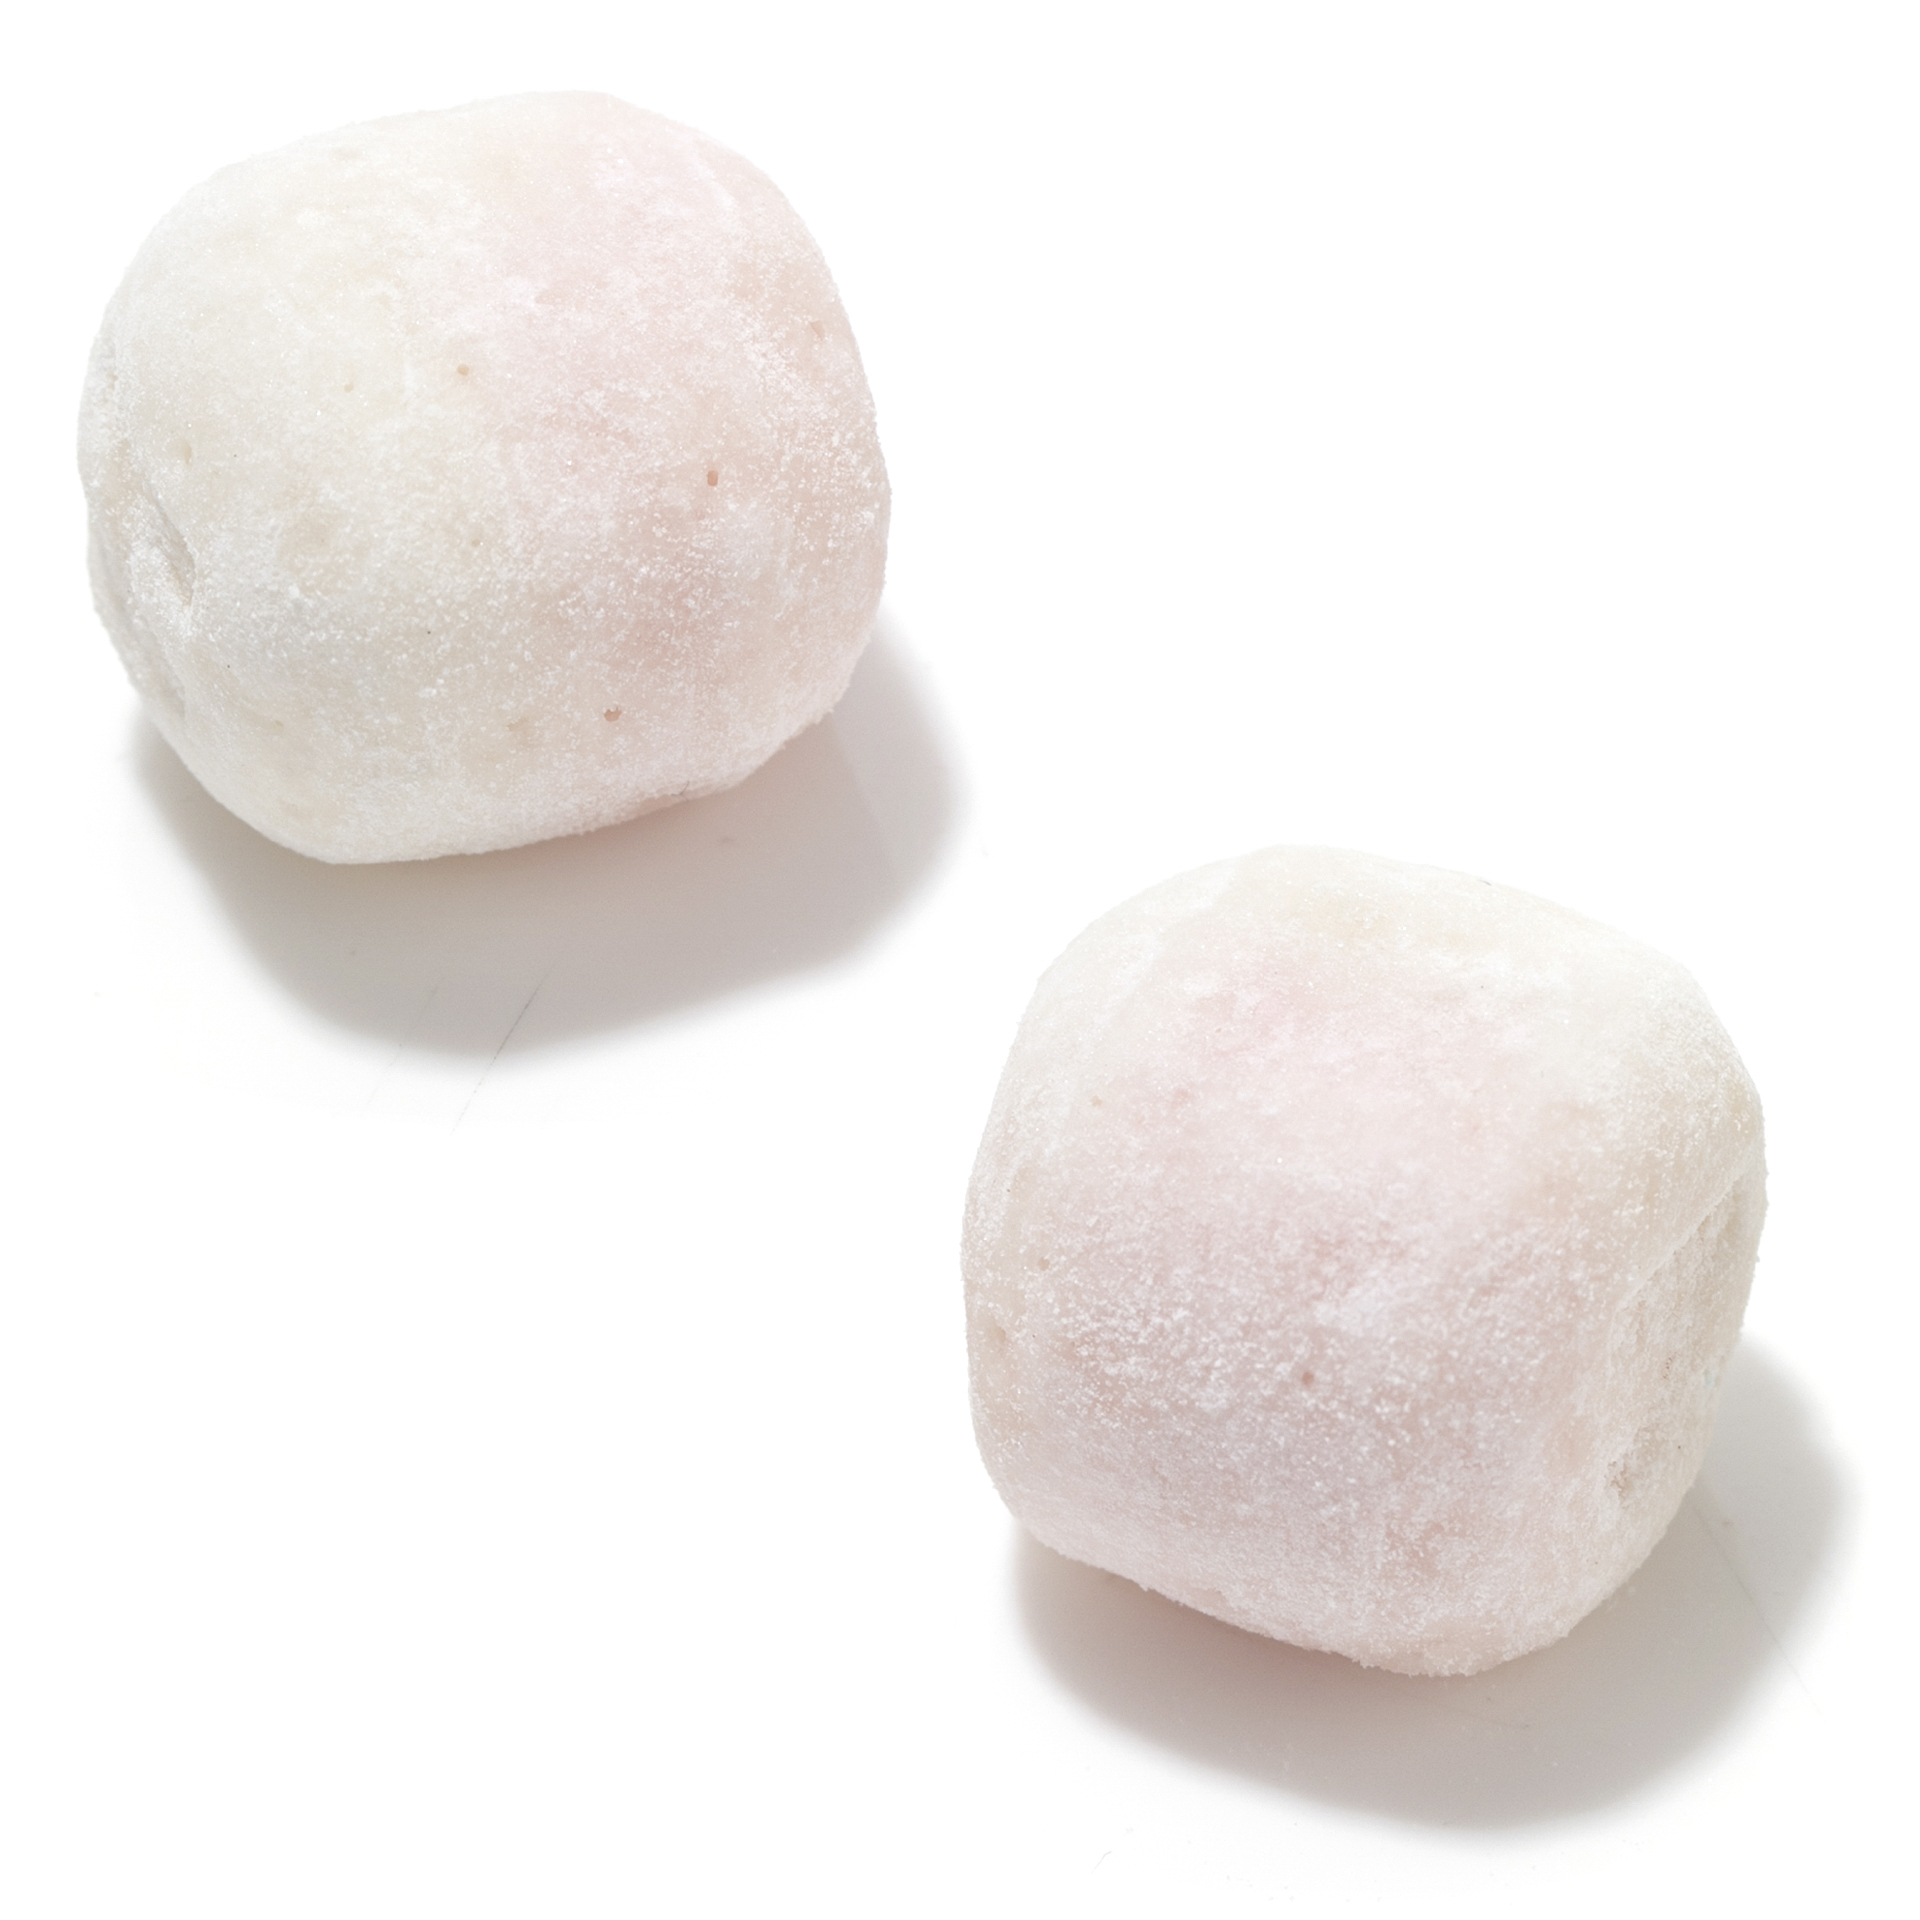 Colliers Bonbons - Fizzy Sweet - Fizzy Distribution